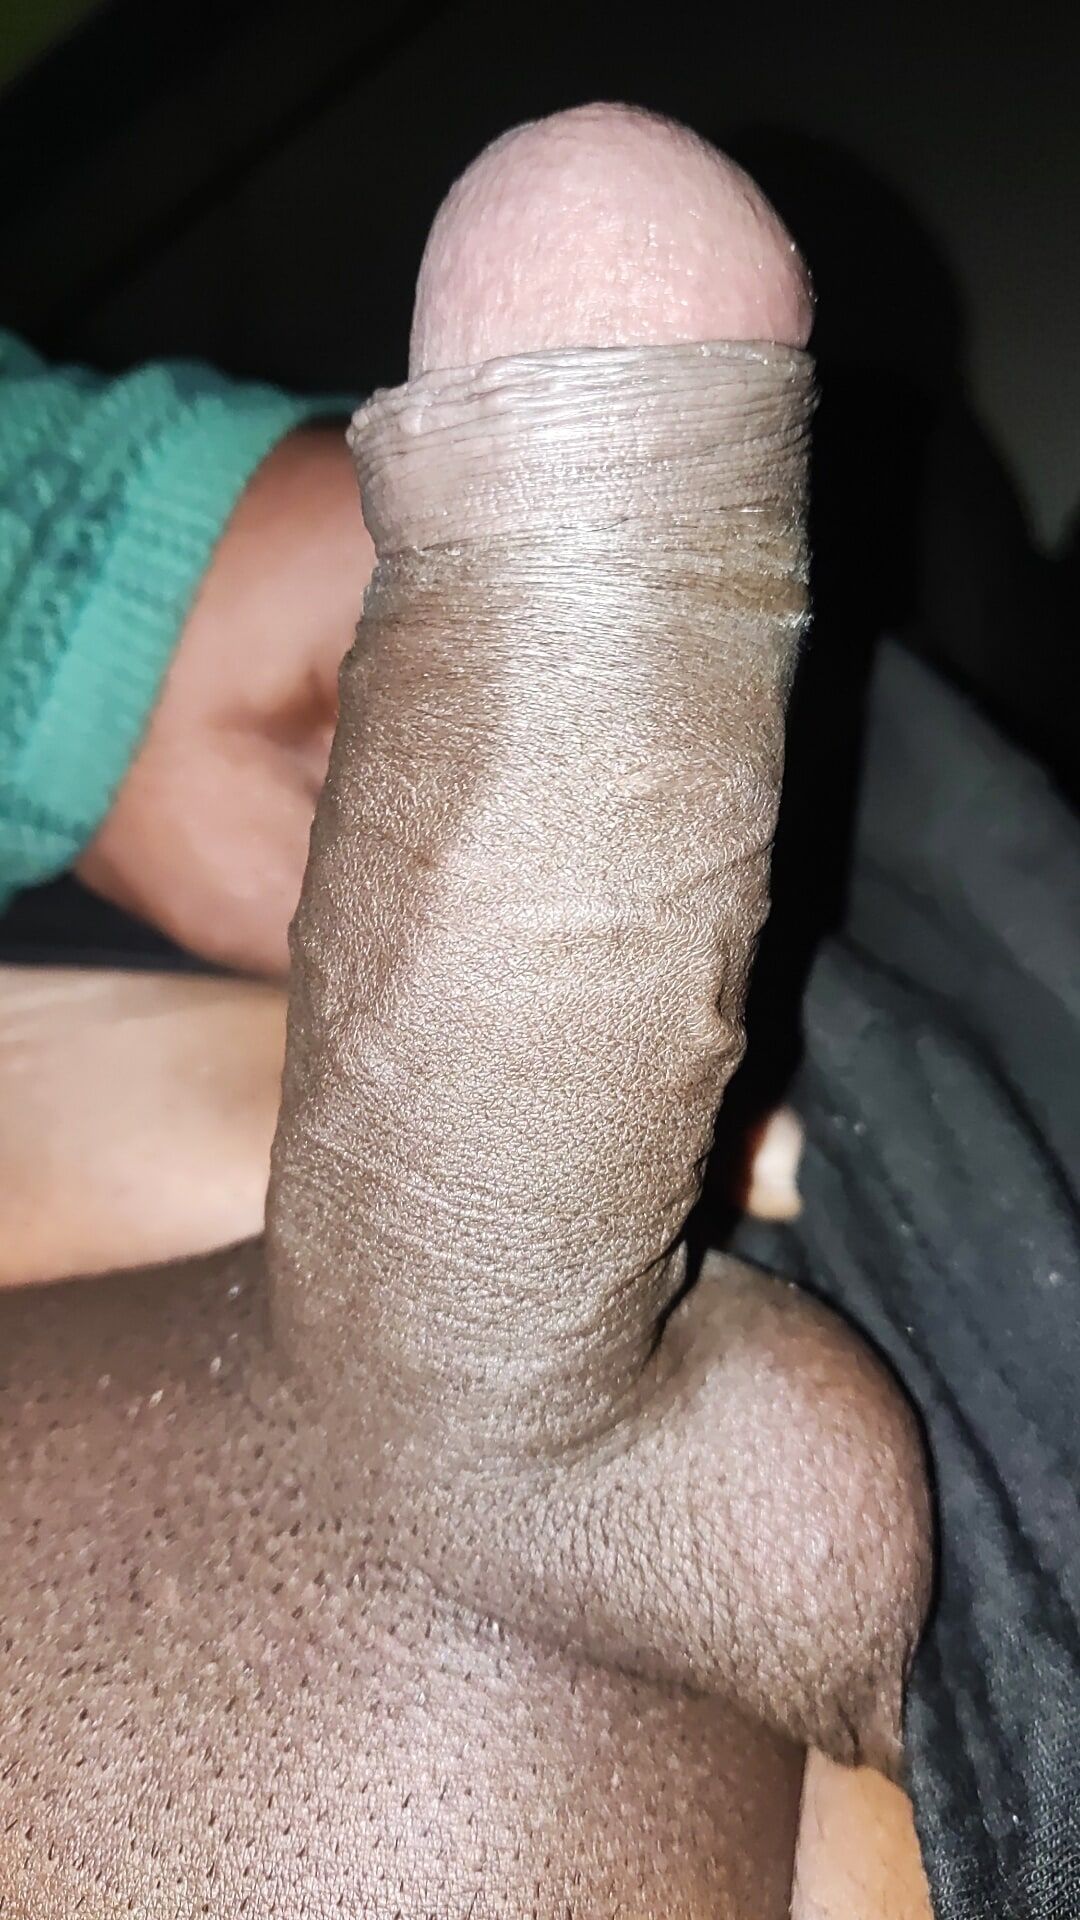 Who wants my shaved black cock